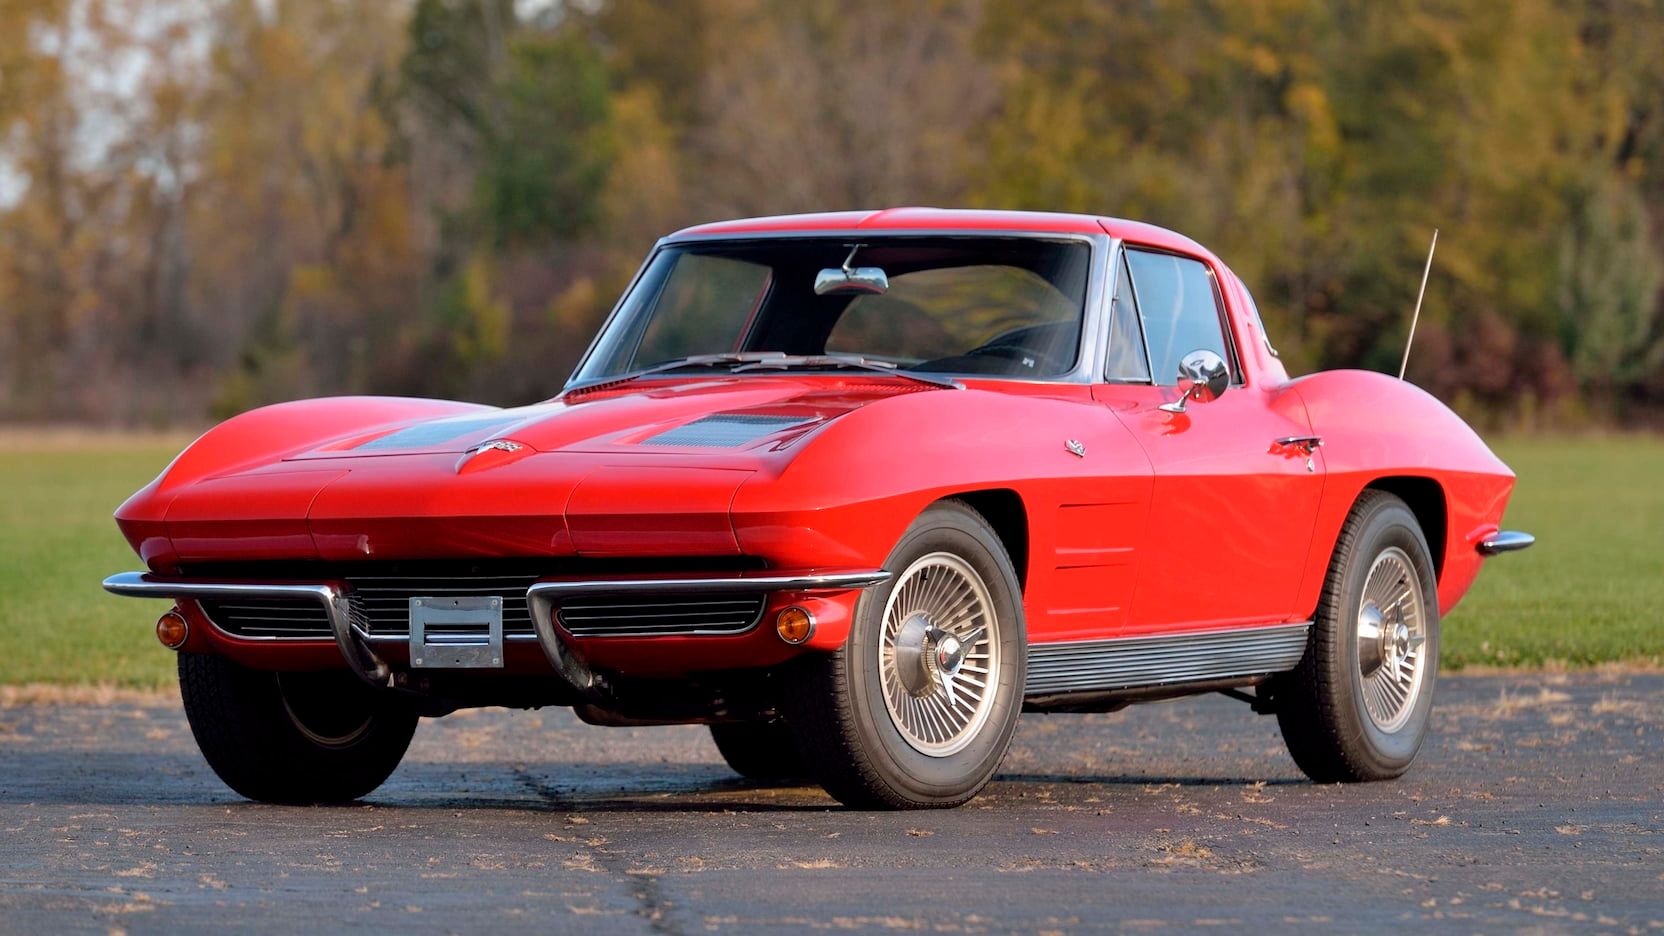 Red 1963 Chevrolet Corvette Sting Ray on the road